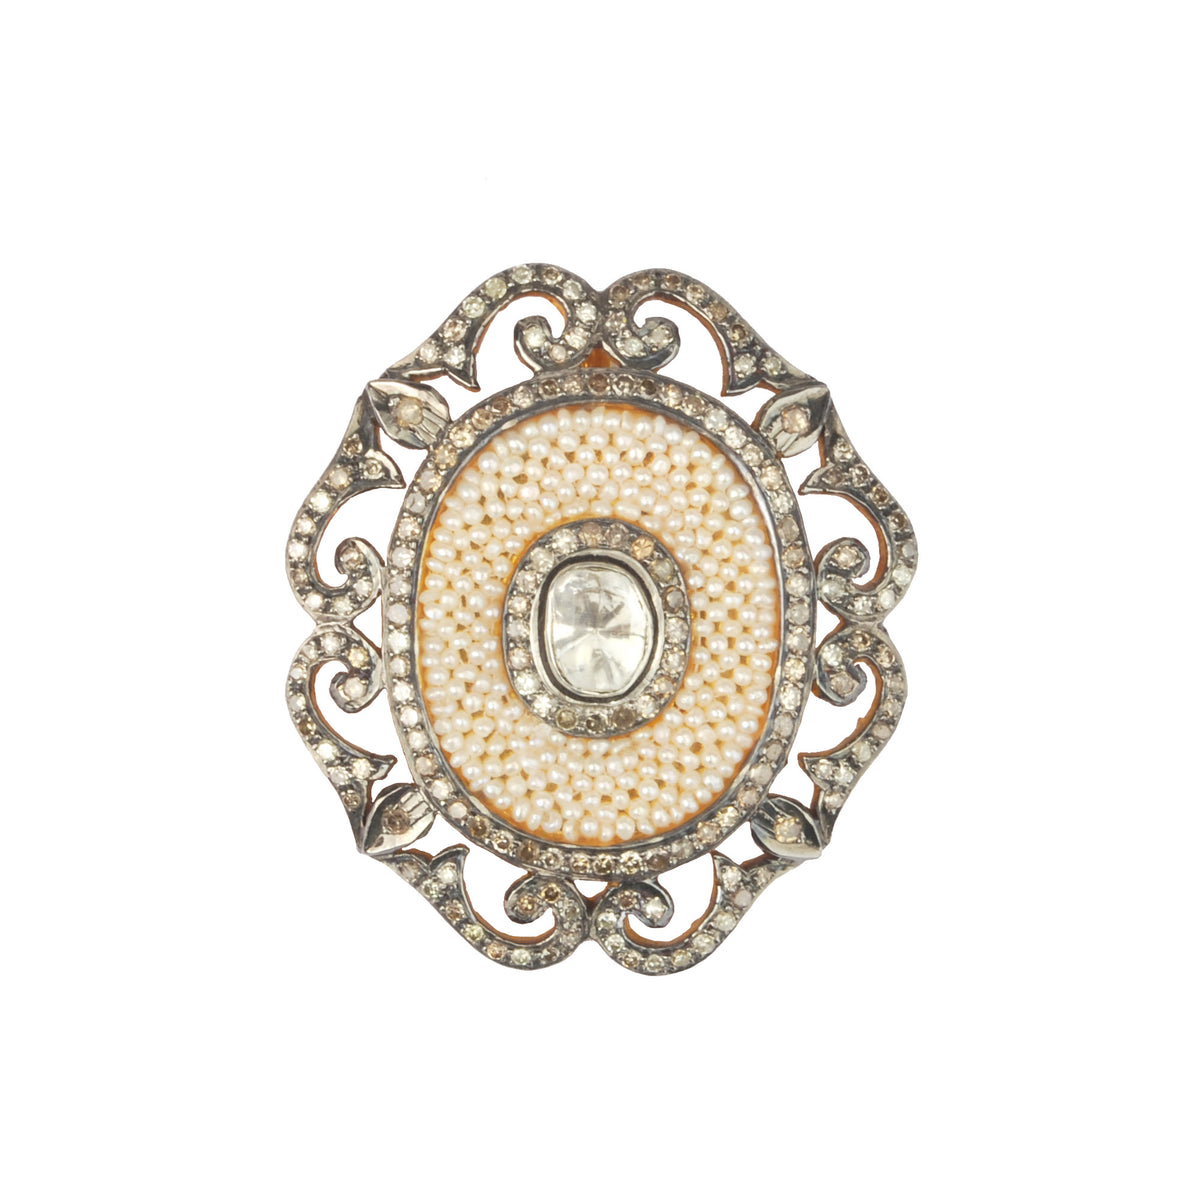 Pearls weaved in with diamonds in victorian silver pendant,Silver Necklaces, Earrings, Rings, Bangles, Pendants, And Anklets, Shop, Online, Beauty, Collections, Jewelry store near me, Coral, Buy online jewelry, Buy rings online, Buy earrings online, Buy n